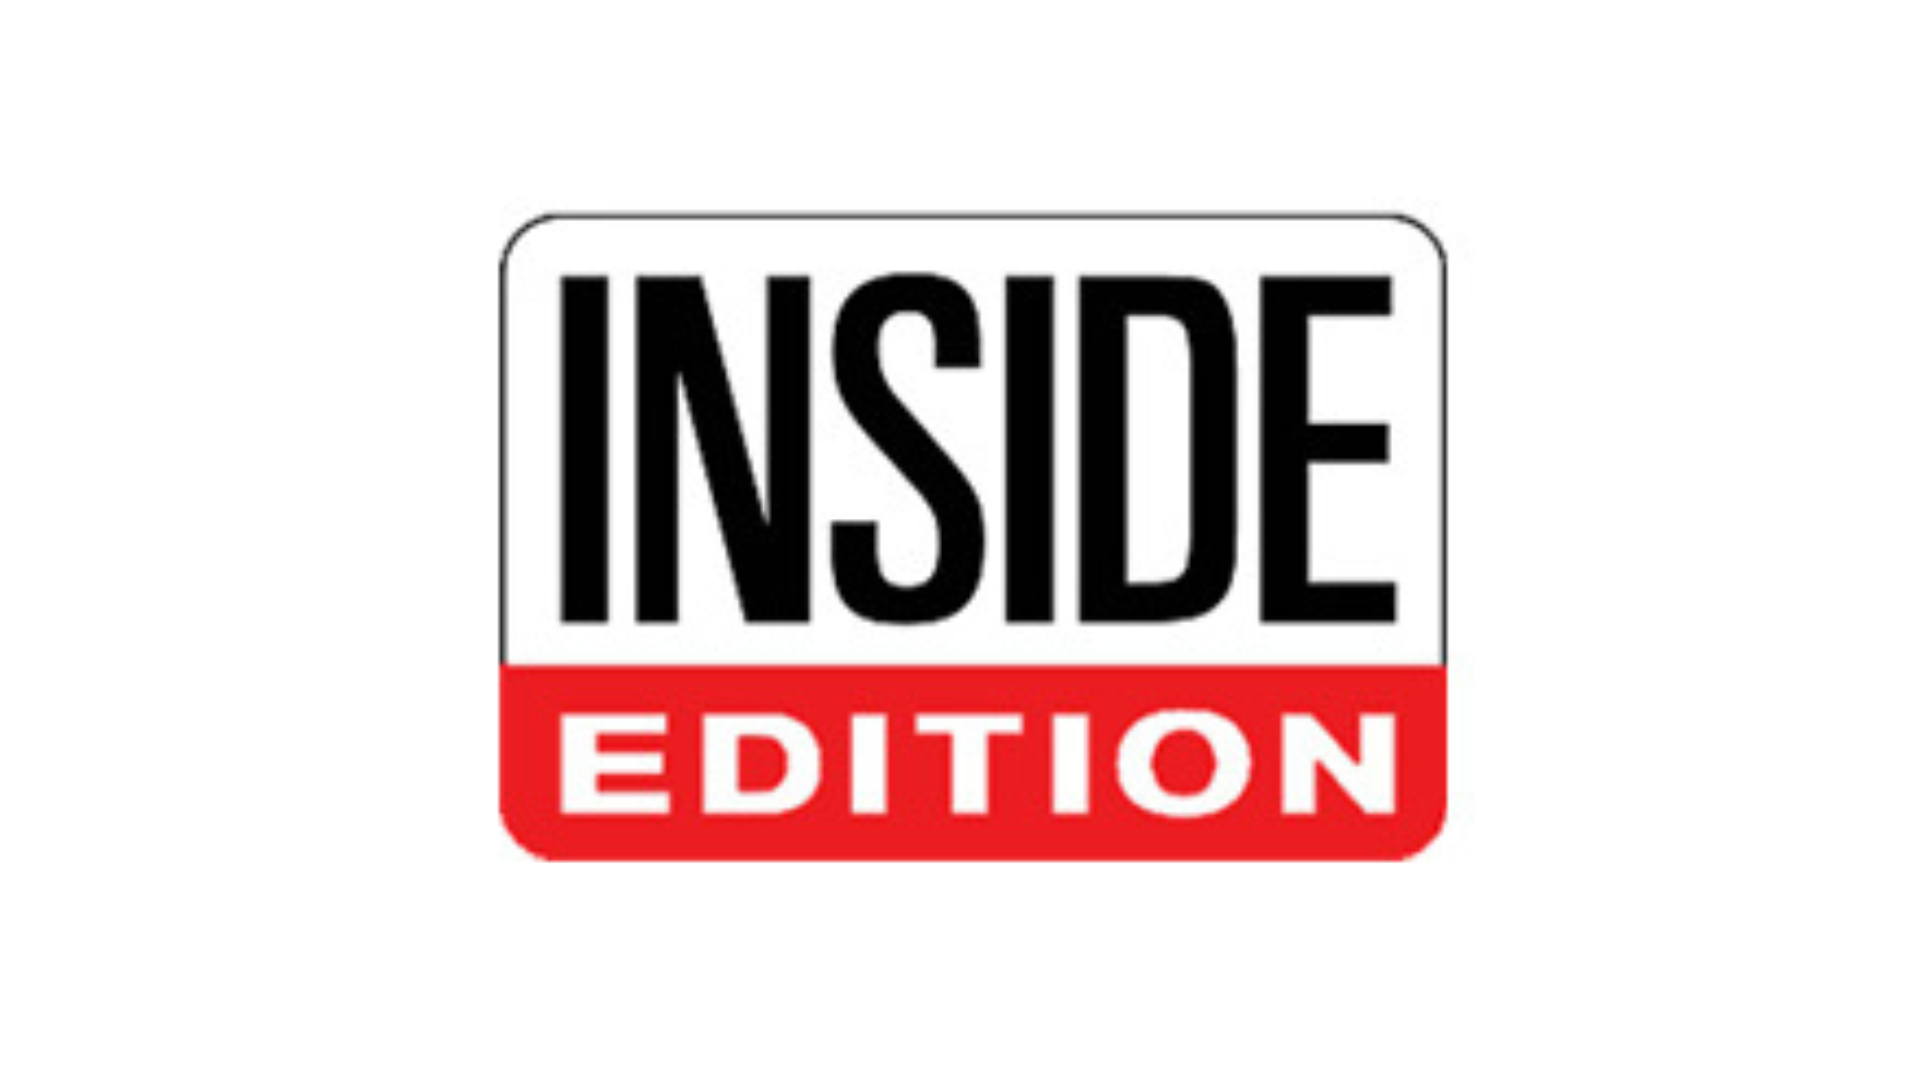 INSIDE EDITION HORIZONTAL.png